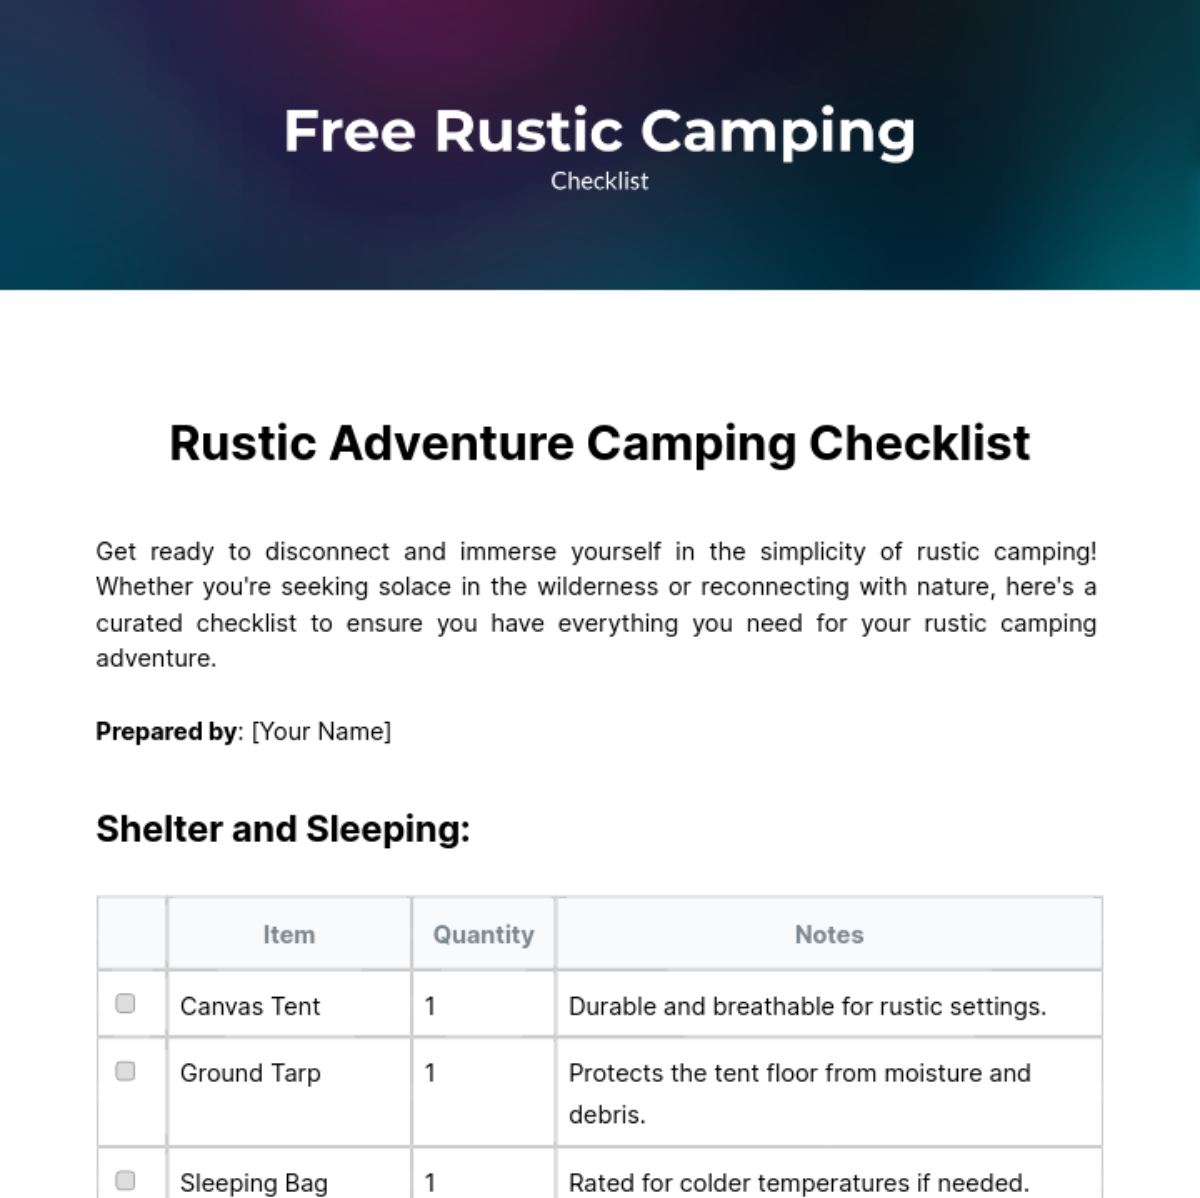 Free Rustic Camping Checklist Template